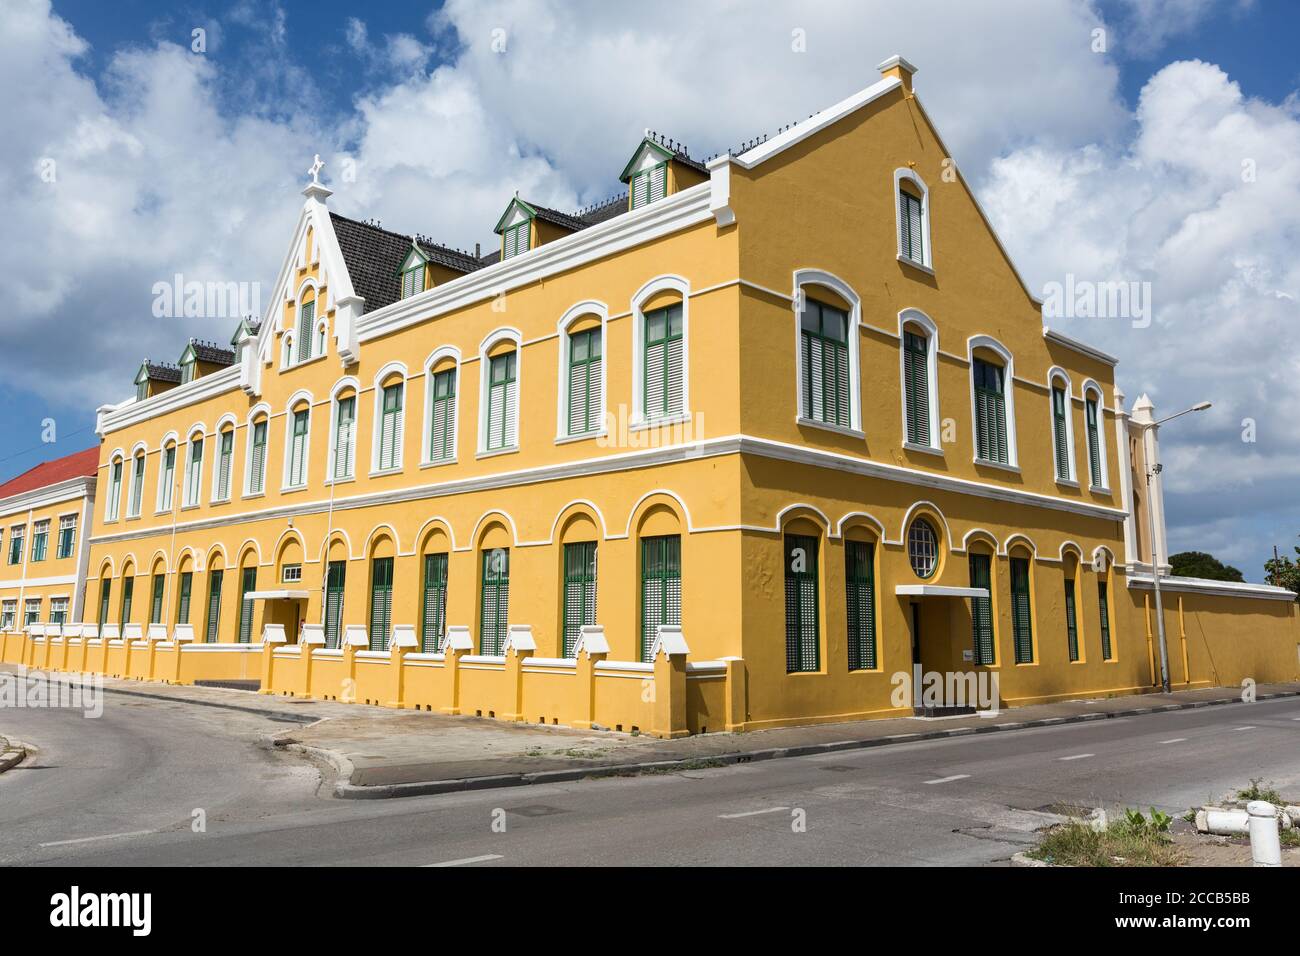 Parish Hall of the Roman Catholic Diocese of Willemstad at Julianaplein 5 in the Pietermaai district of Willemstad.  Built about 1882.   The Historic Stock Photo